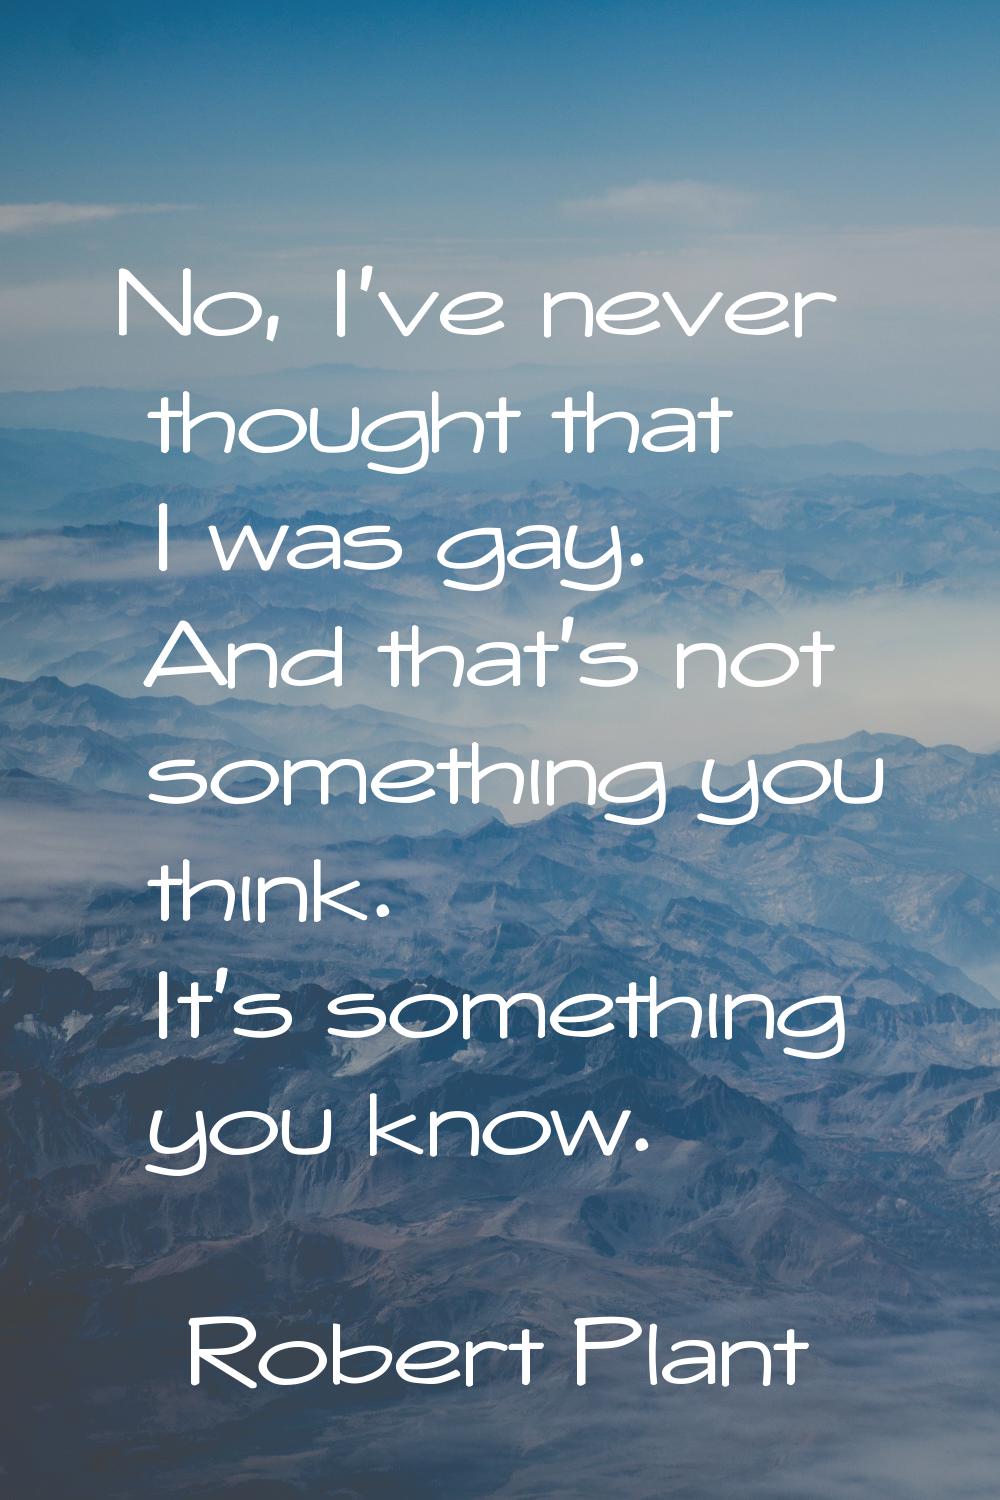 No, I've never thought that I was gay. And that's not something you think. It's something you know.